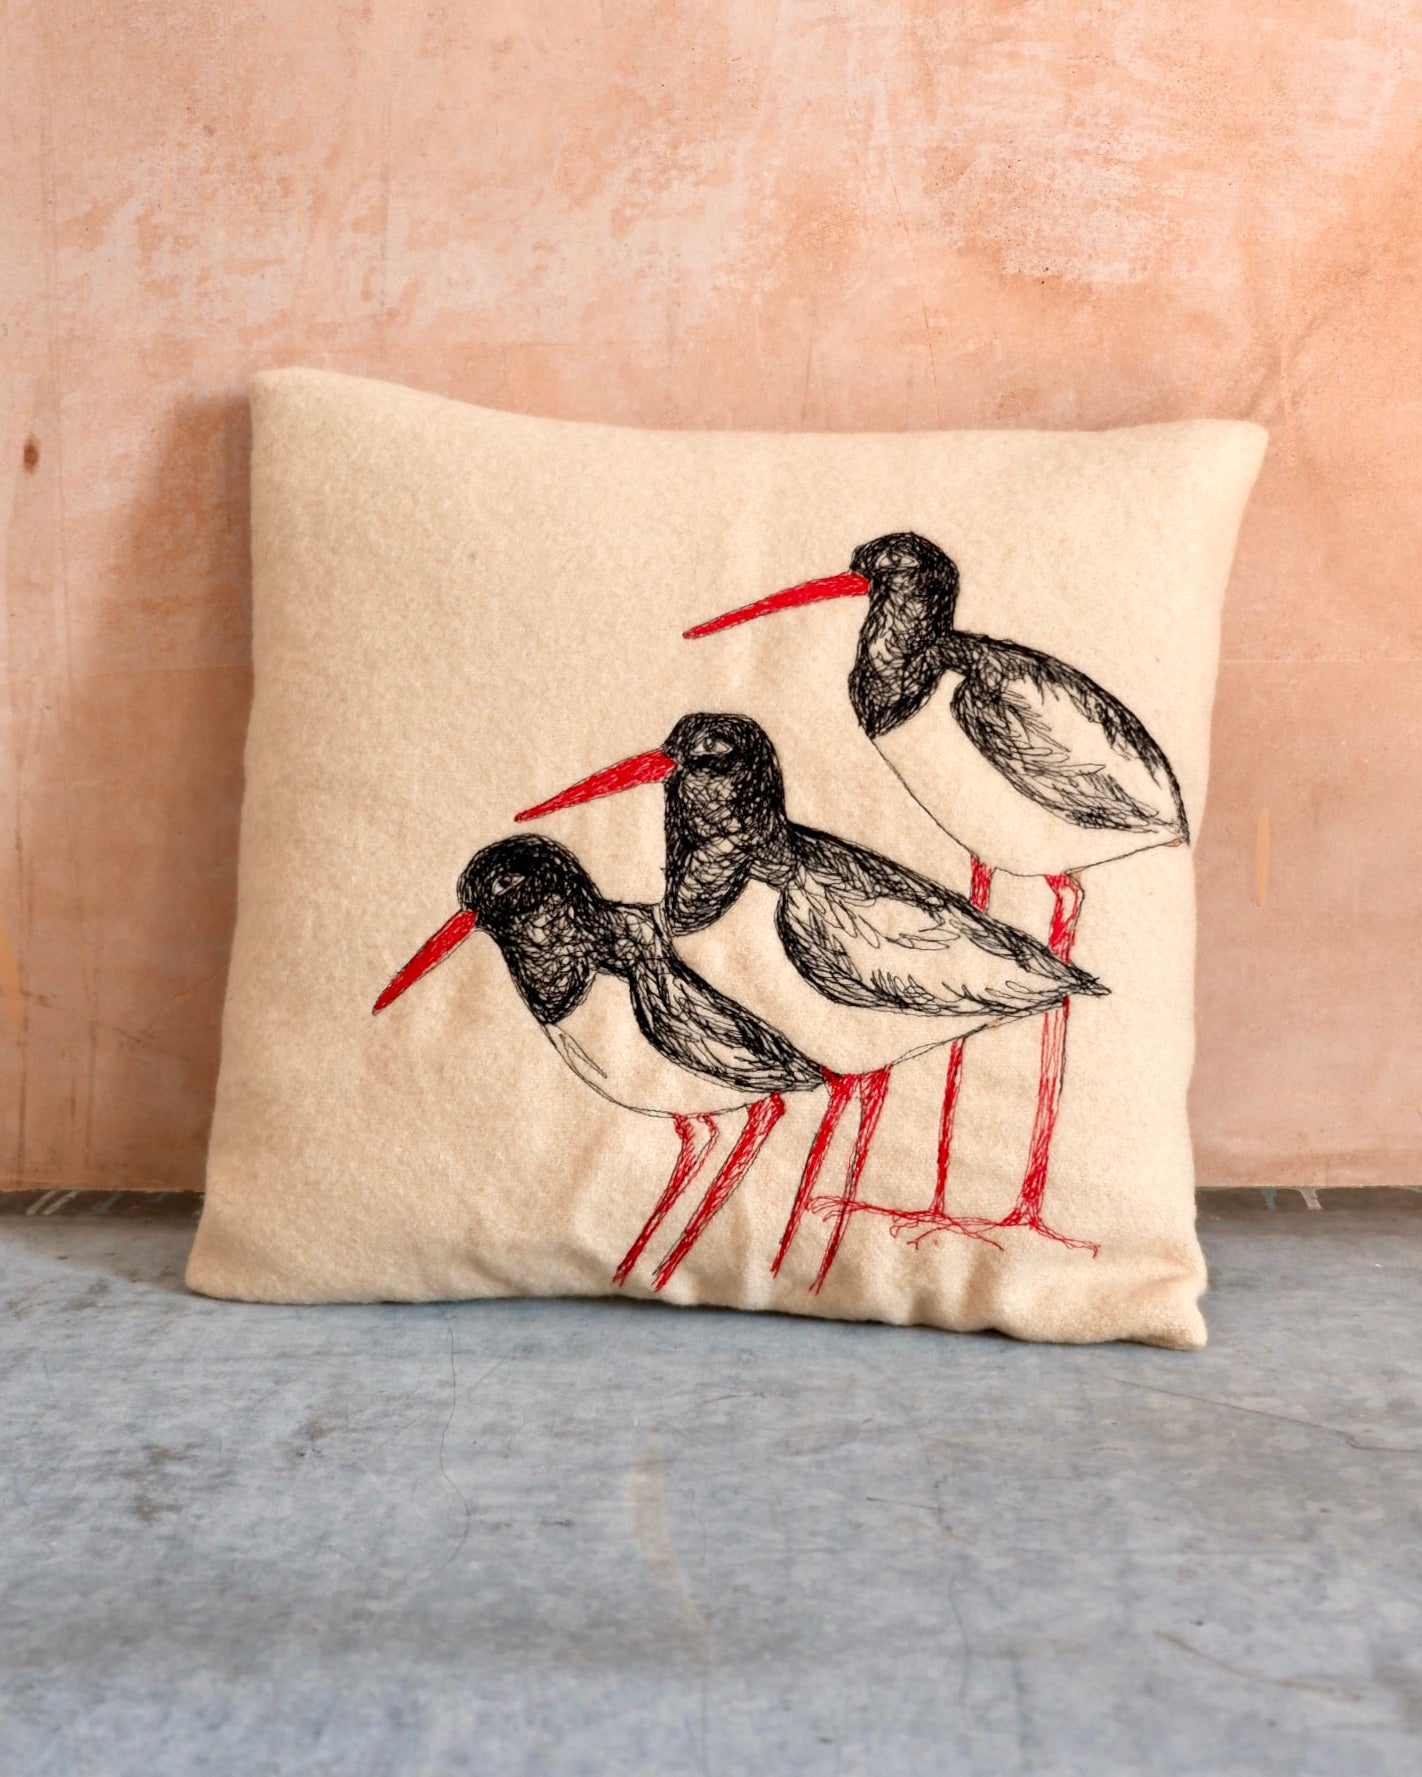 anna osbourne the speculating rook textiles embroidery screen print homeware Oystercatchers Cushion